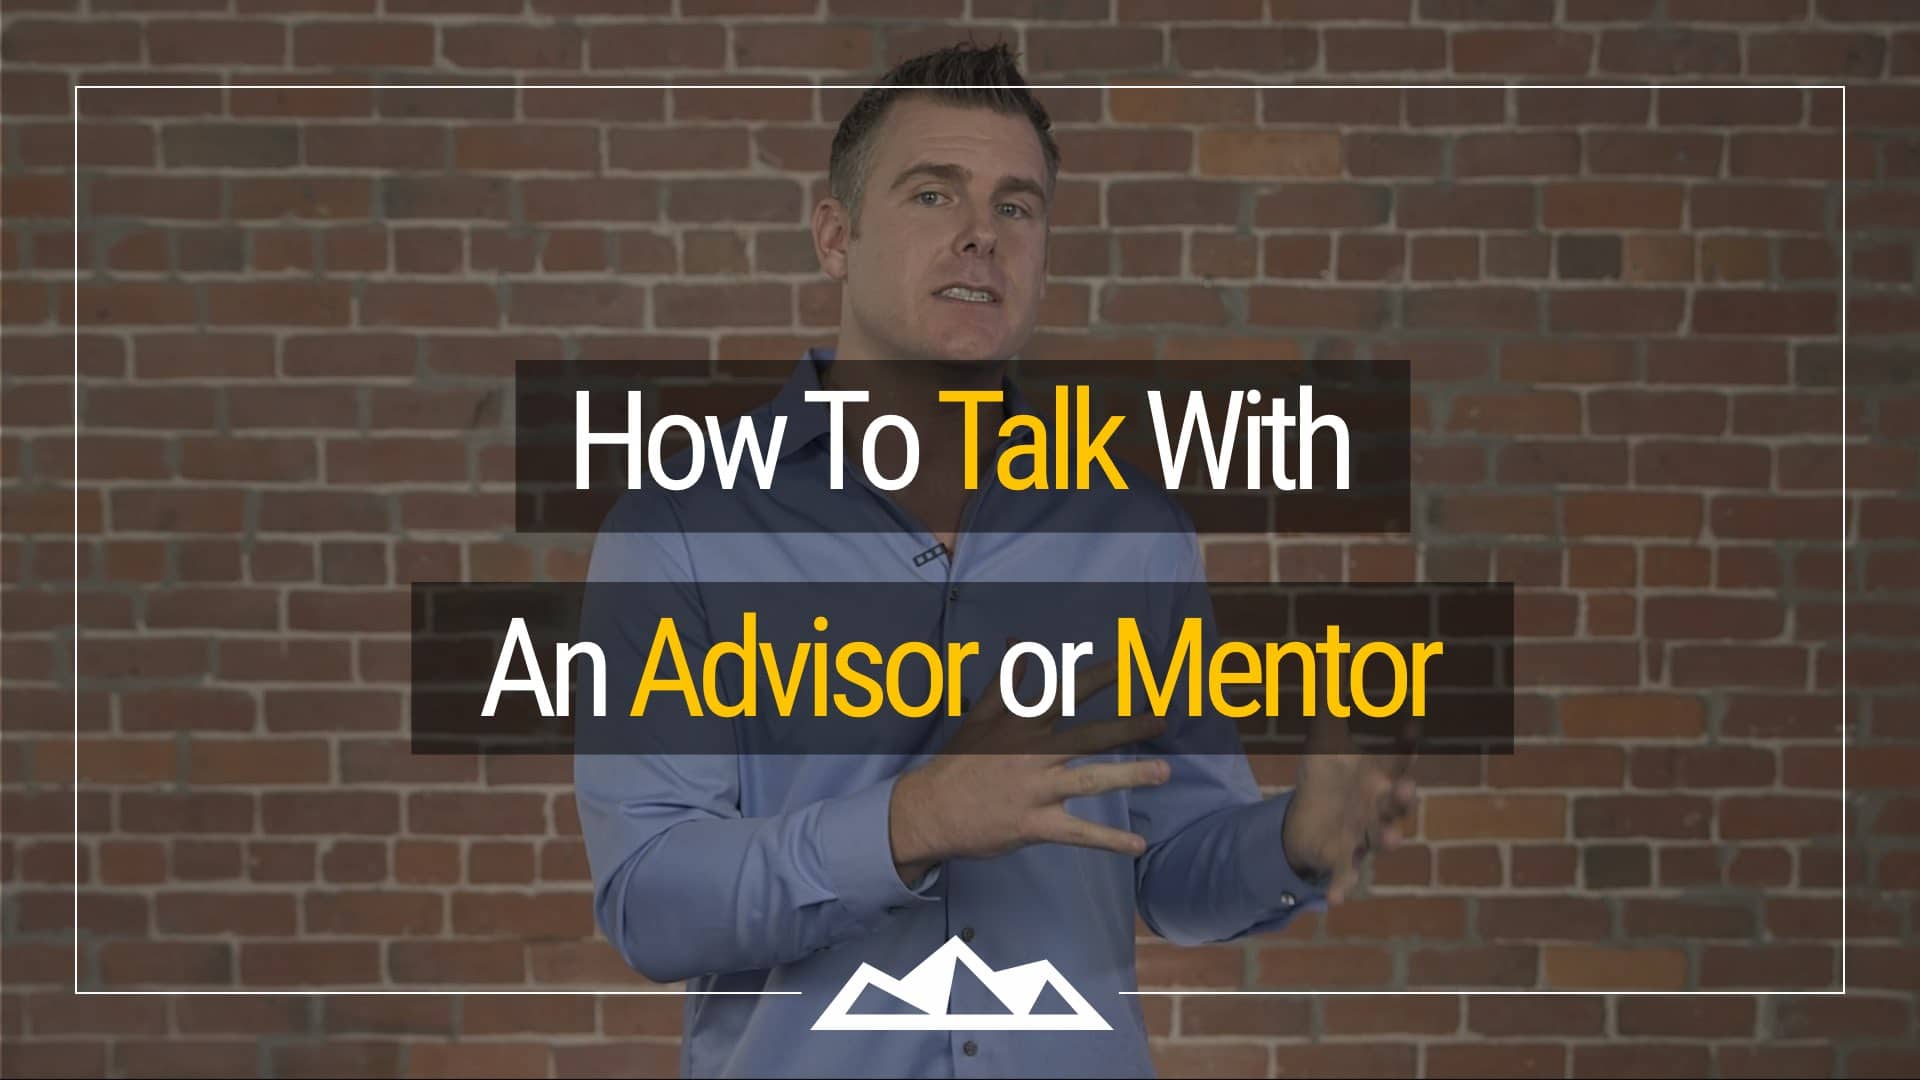 5 Steps That Will Take The Fear Out of Talking With a Mentor